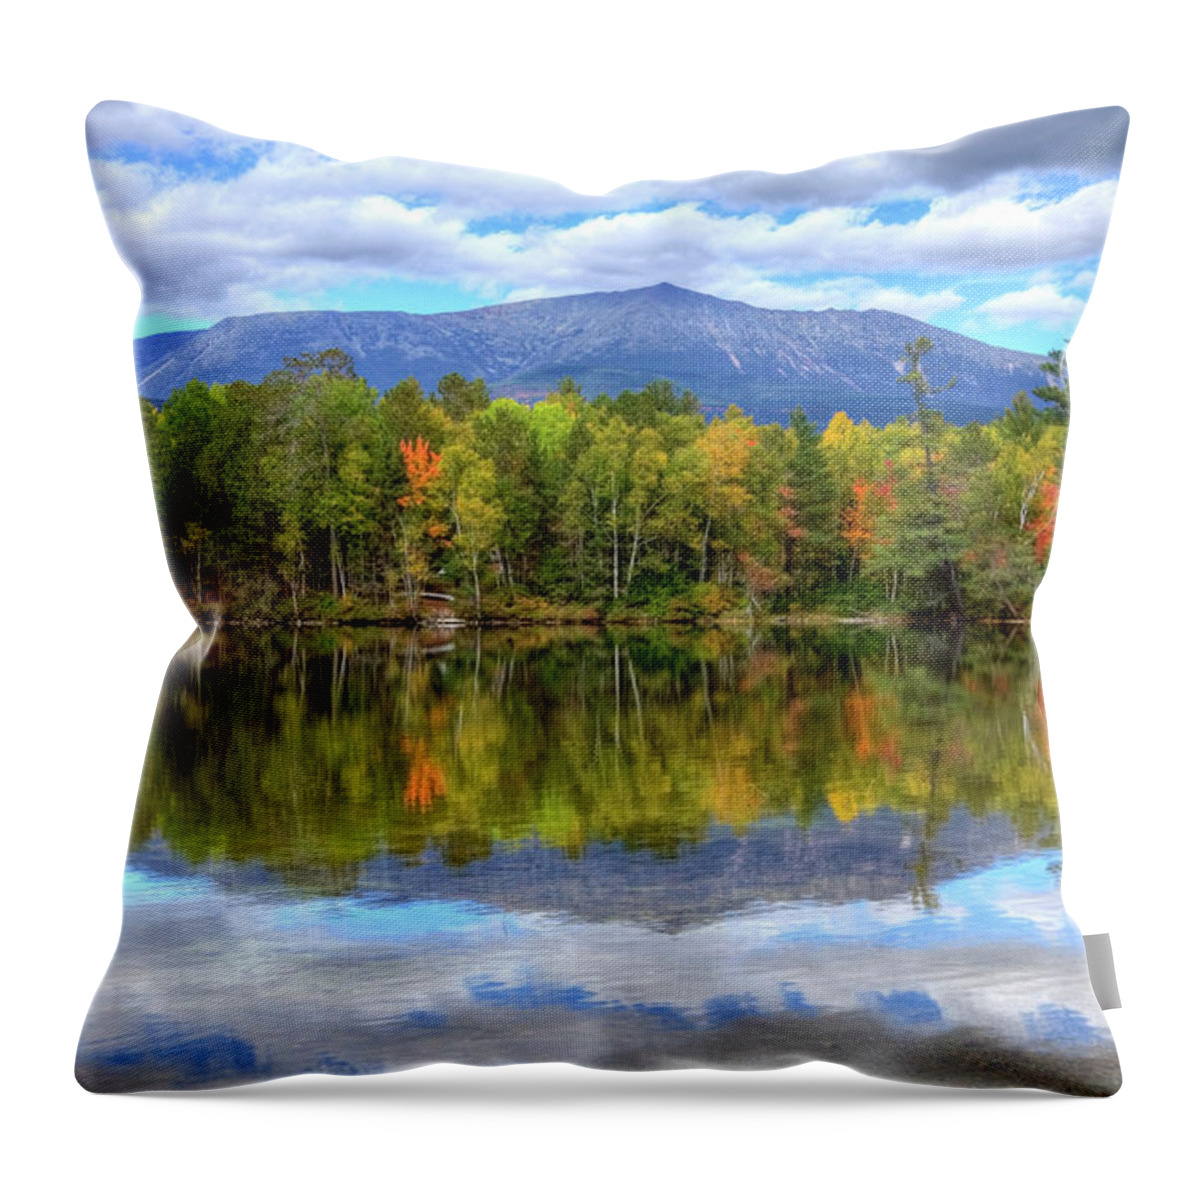 Scenics Throw Pillow featuring the photograph Mount Katahdin by Denistangneyjr